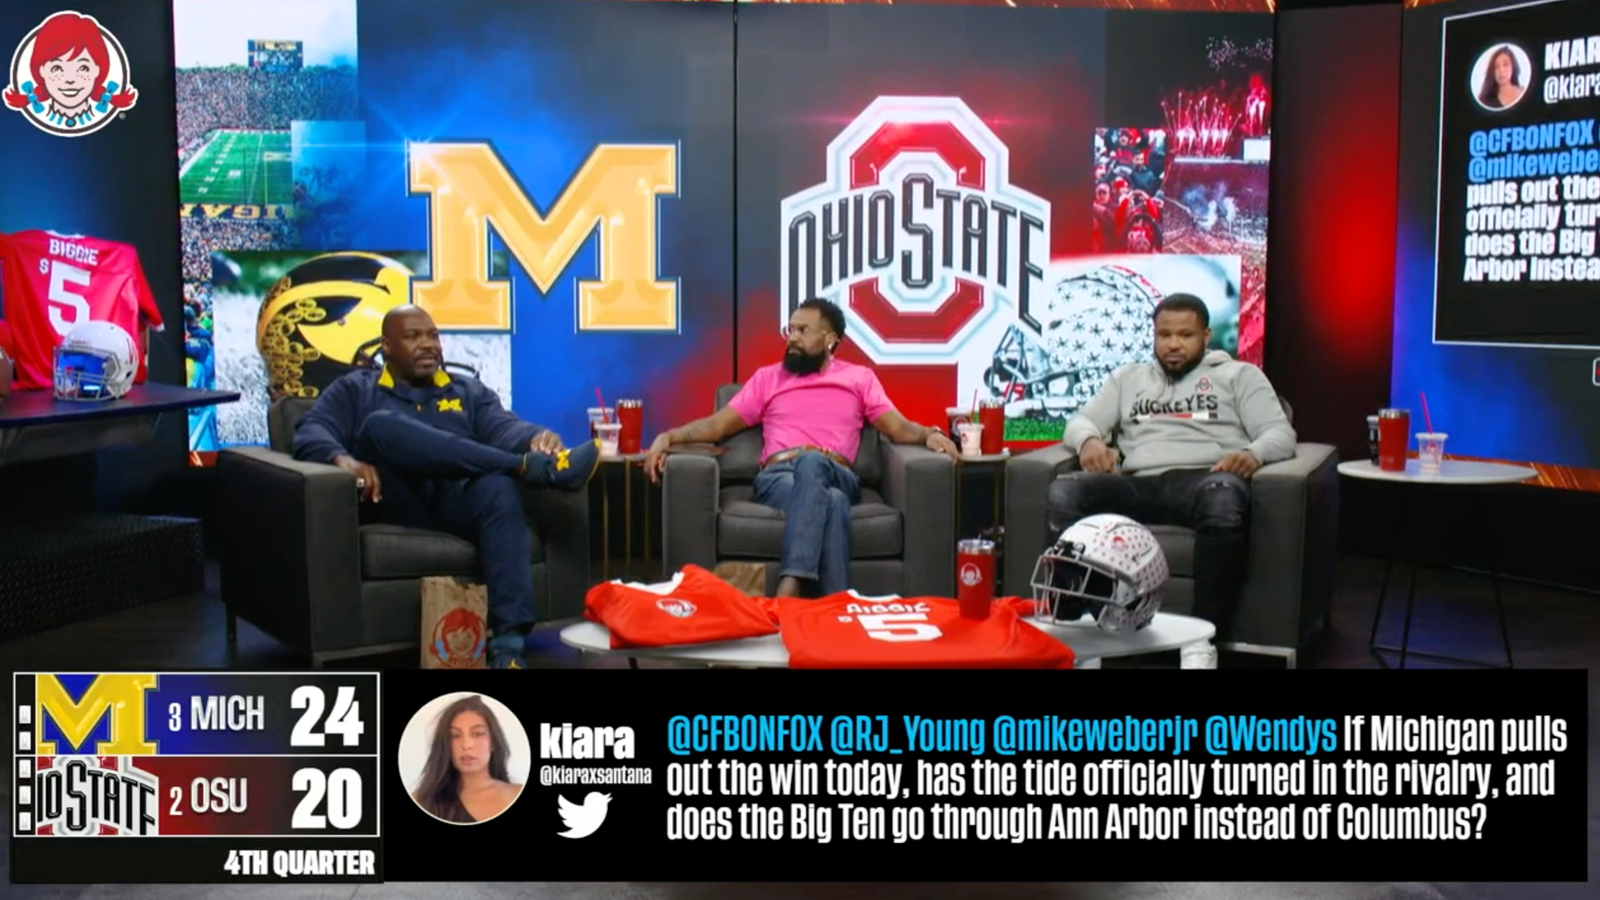 Does the Big Ten go through Ann Arbor instead of Columbus after Michigan's win over Ohio State?